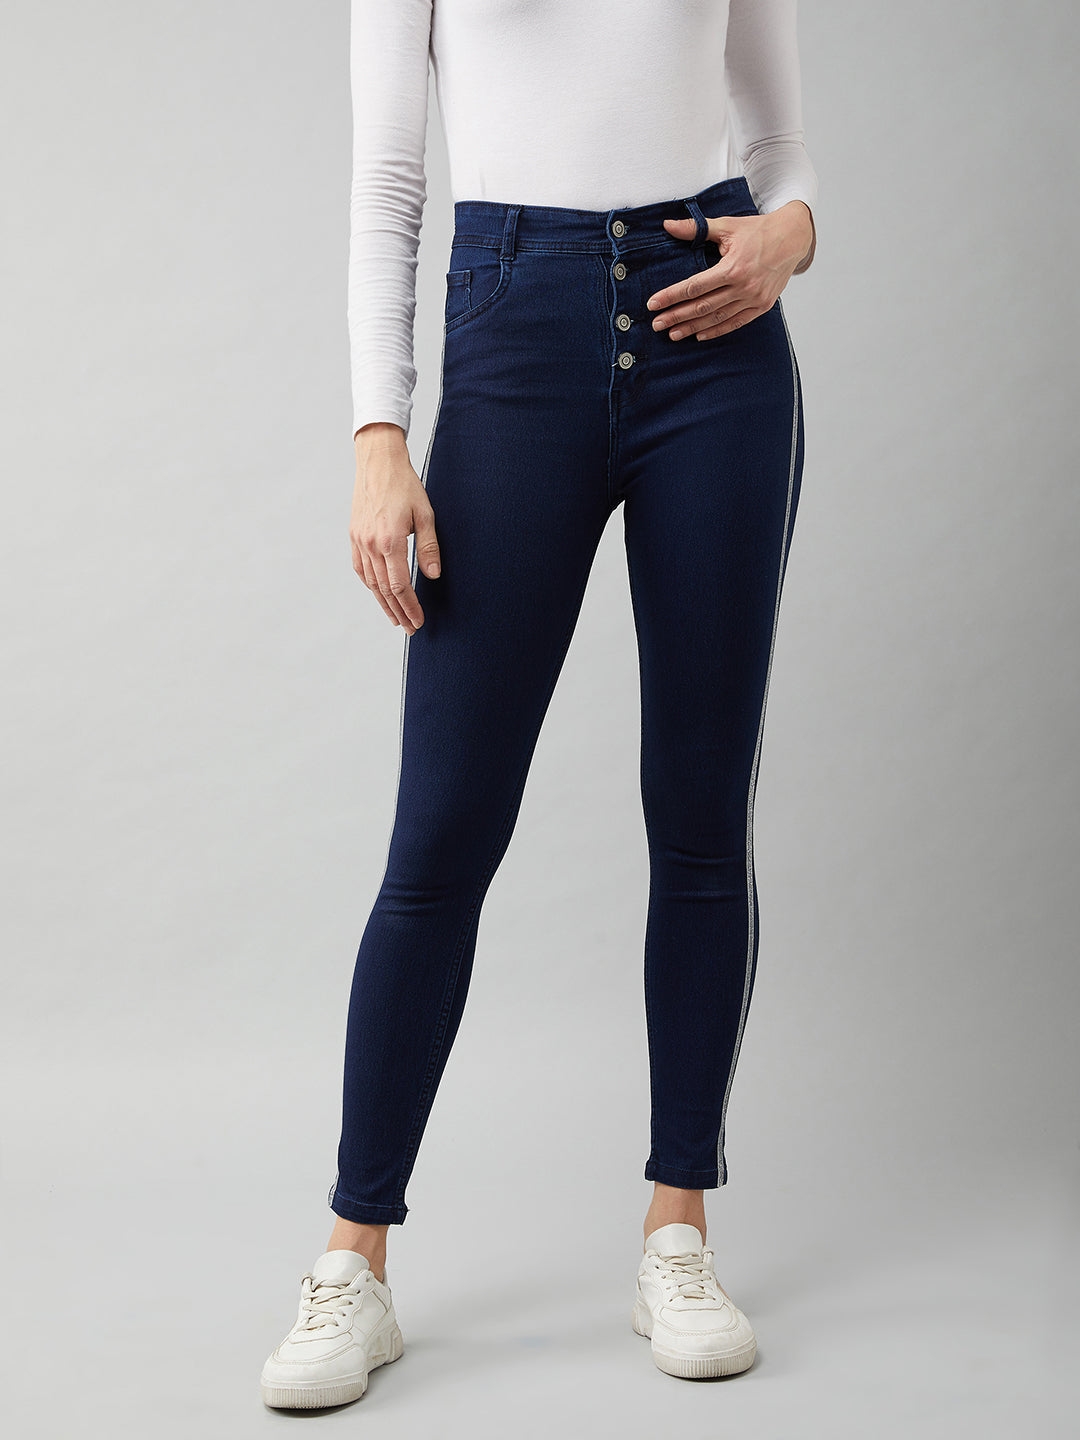 MISS CHASE | Navy Blue Cotton Skinny Fit Relaxed High Rise Regular Length Stretchable Denim Jeans